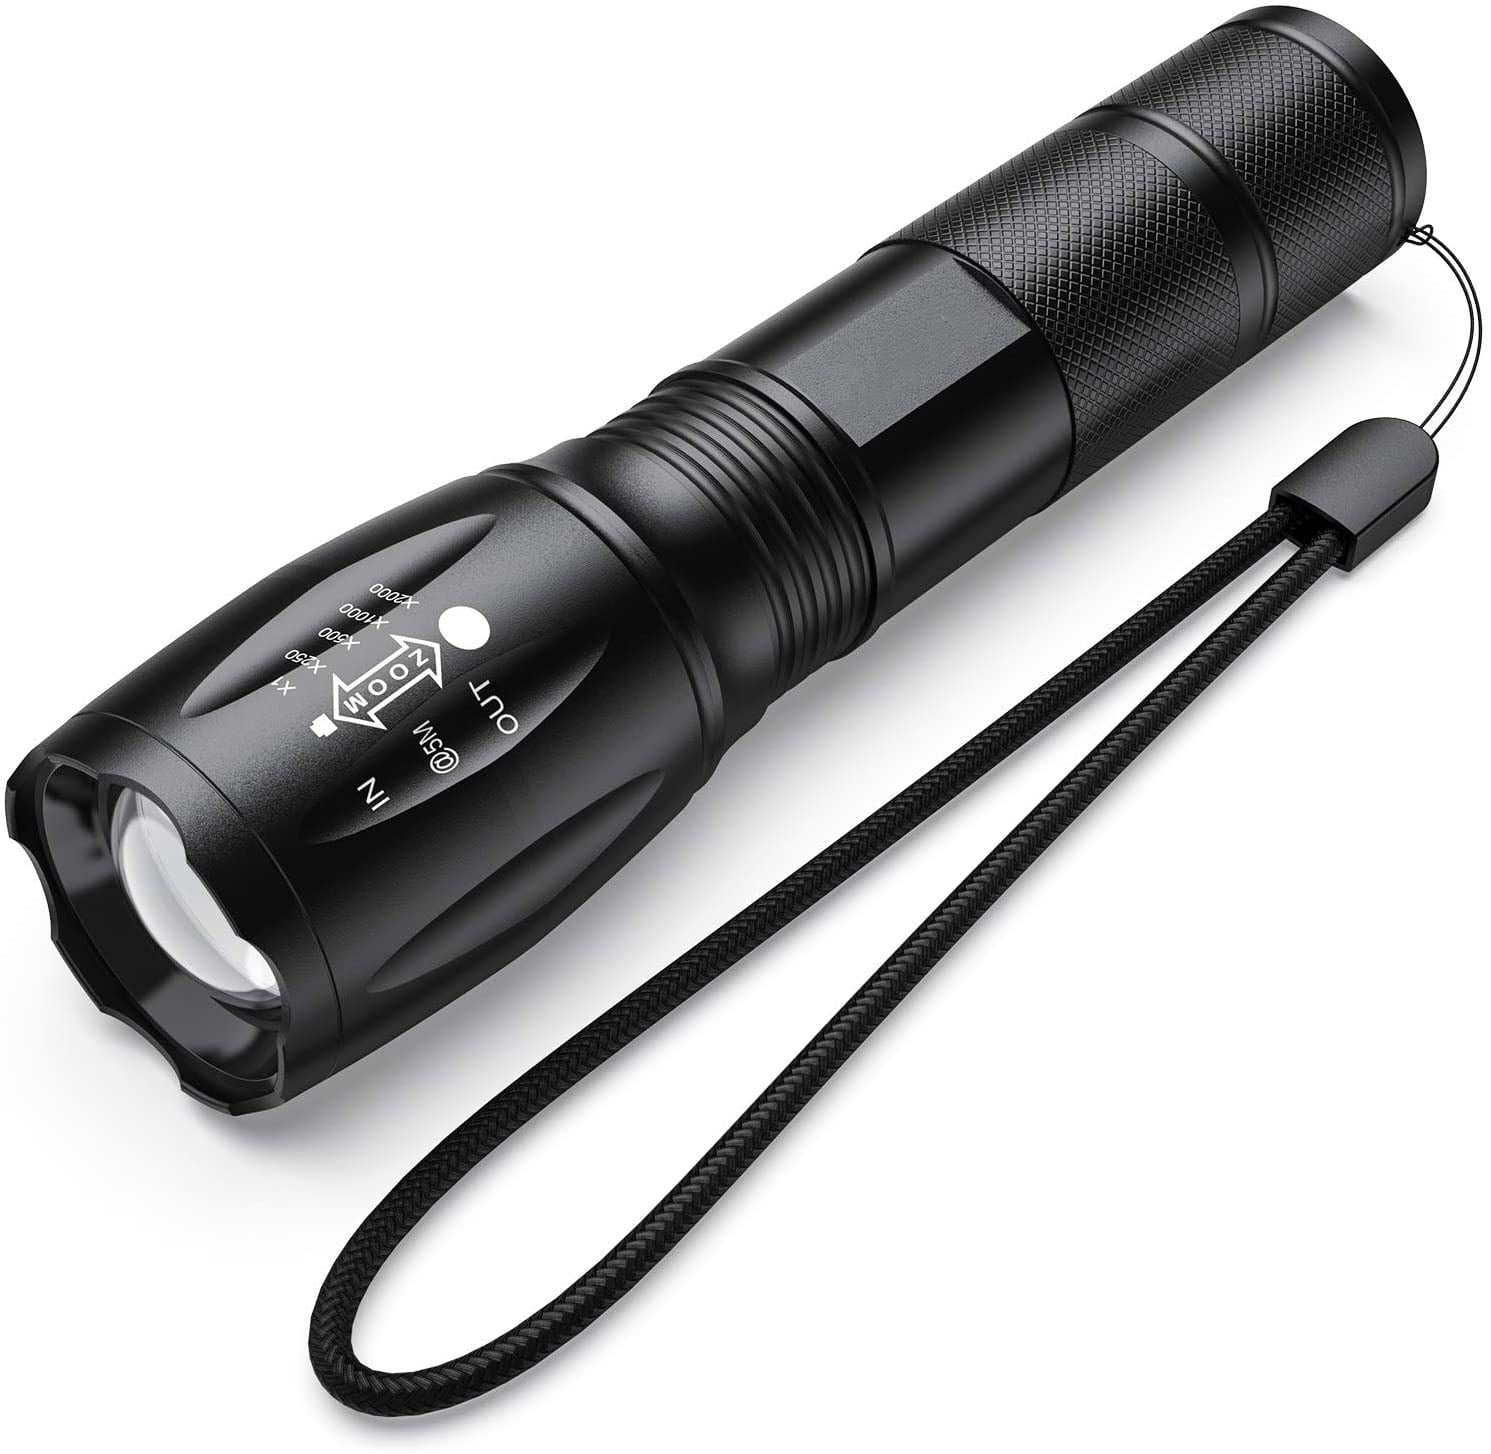 Newest Tactical XML-T6 LED Flashlight Torch Lamp Mobile Power USB Chargeable 